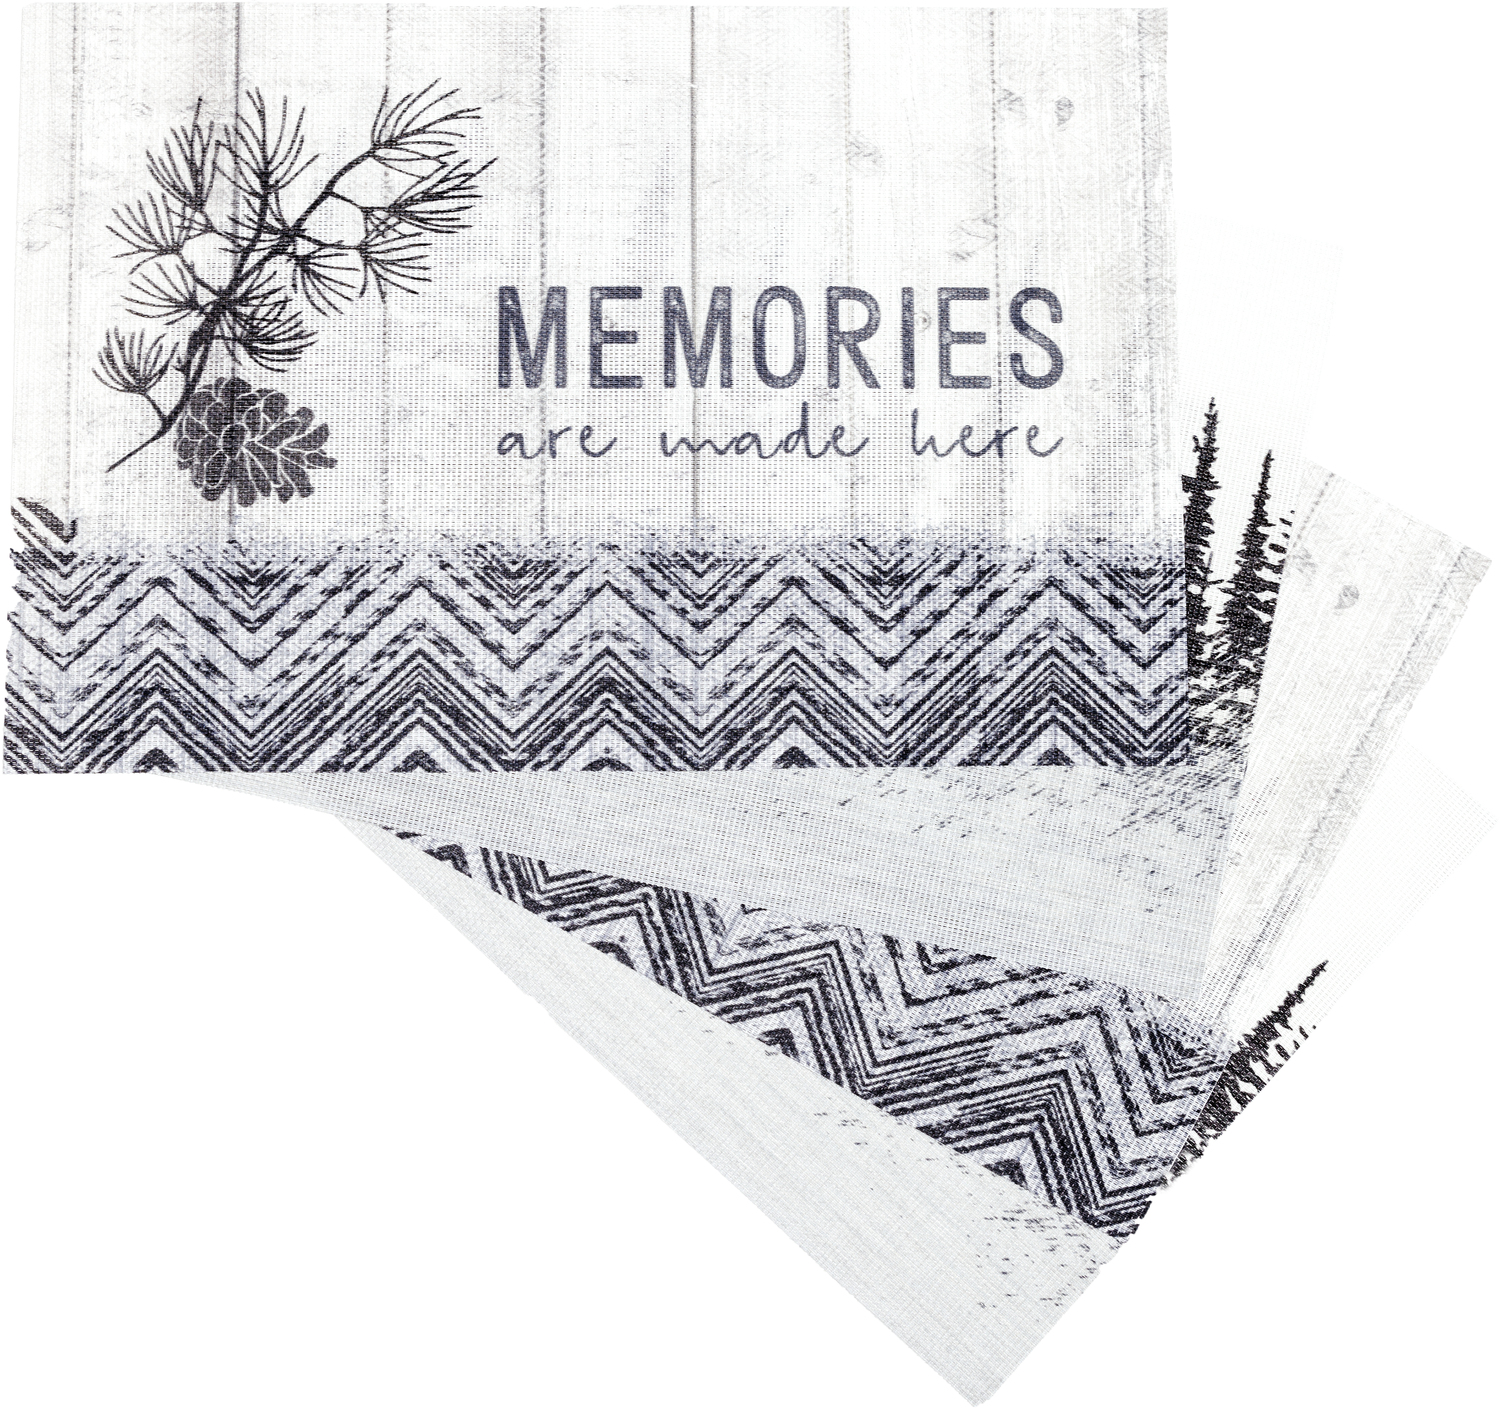 Memories by Wild Woods Lodge - Memories - 17.75" x 11.75" PVC Placemats
(Set of 4)